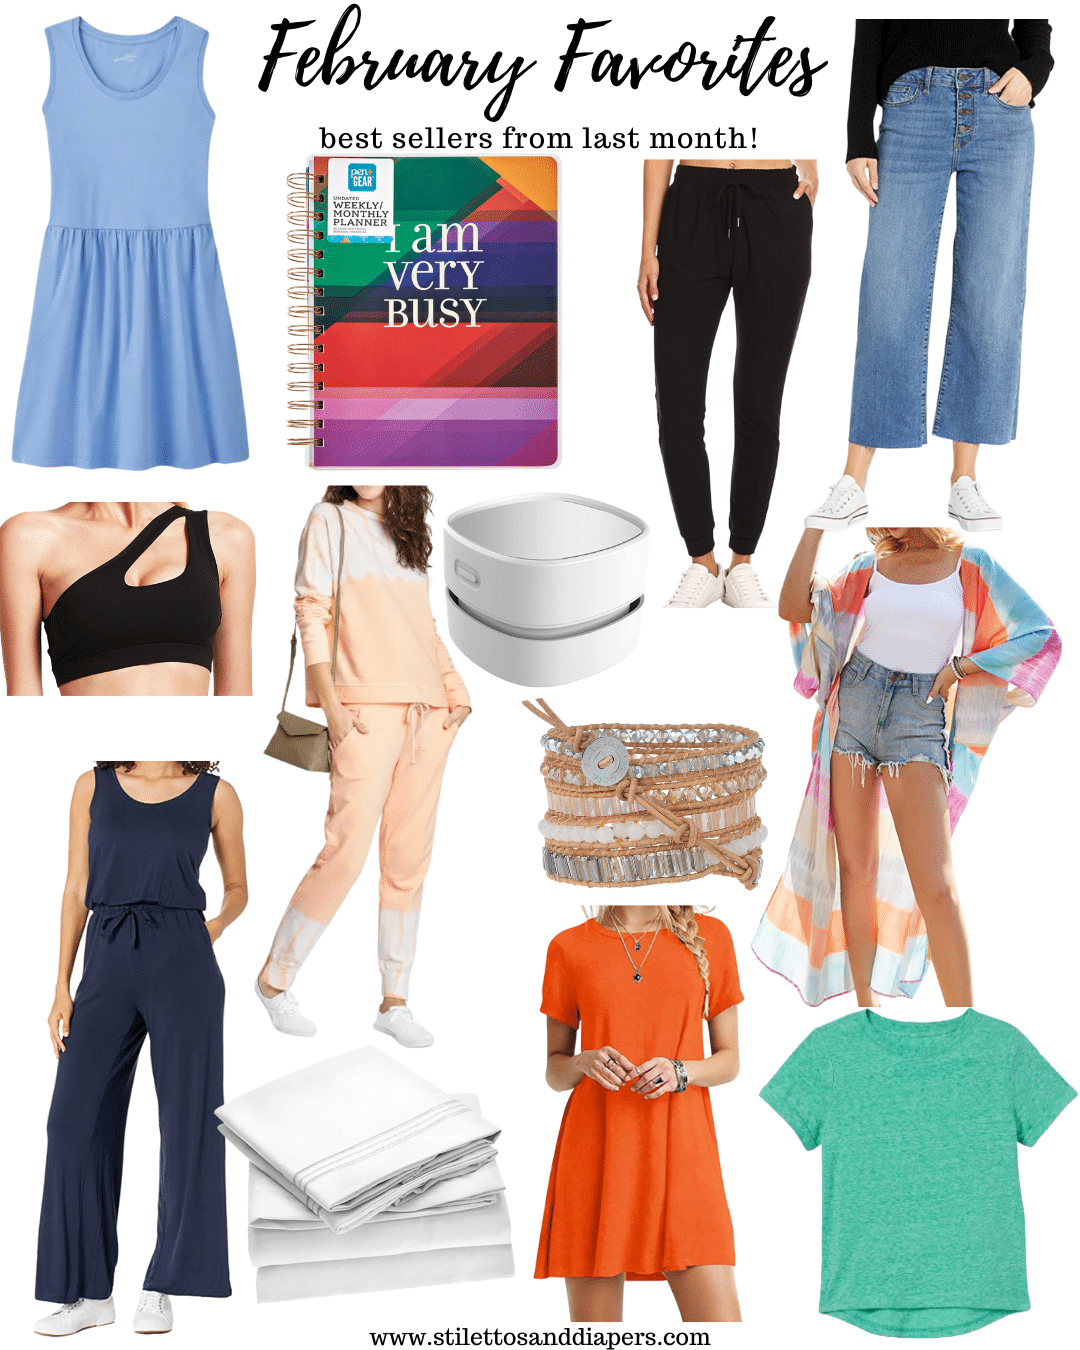 February Favorites, Best sellers, Amazon finds, Stilettos and Diapers